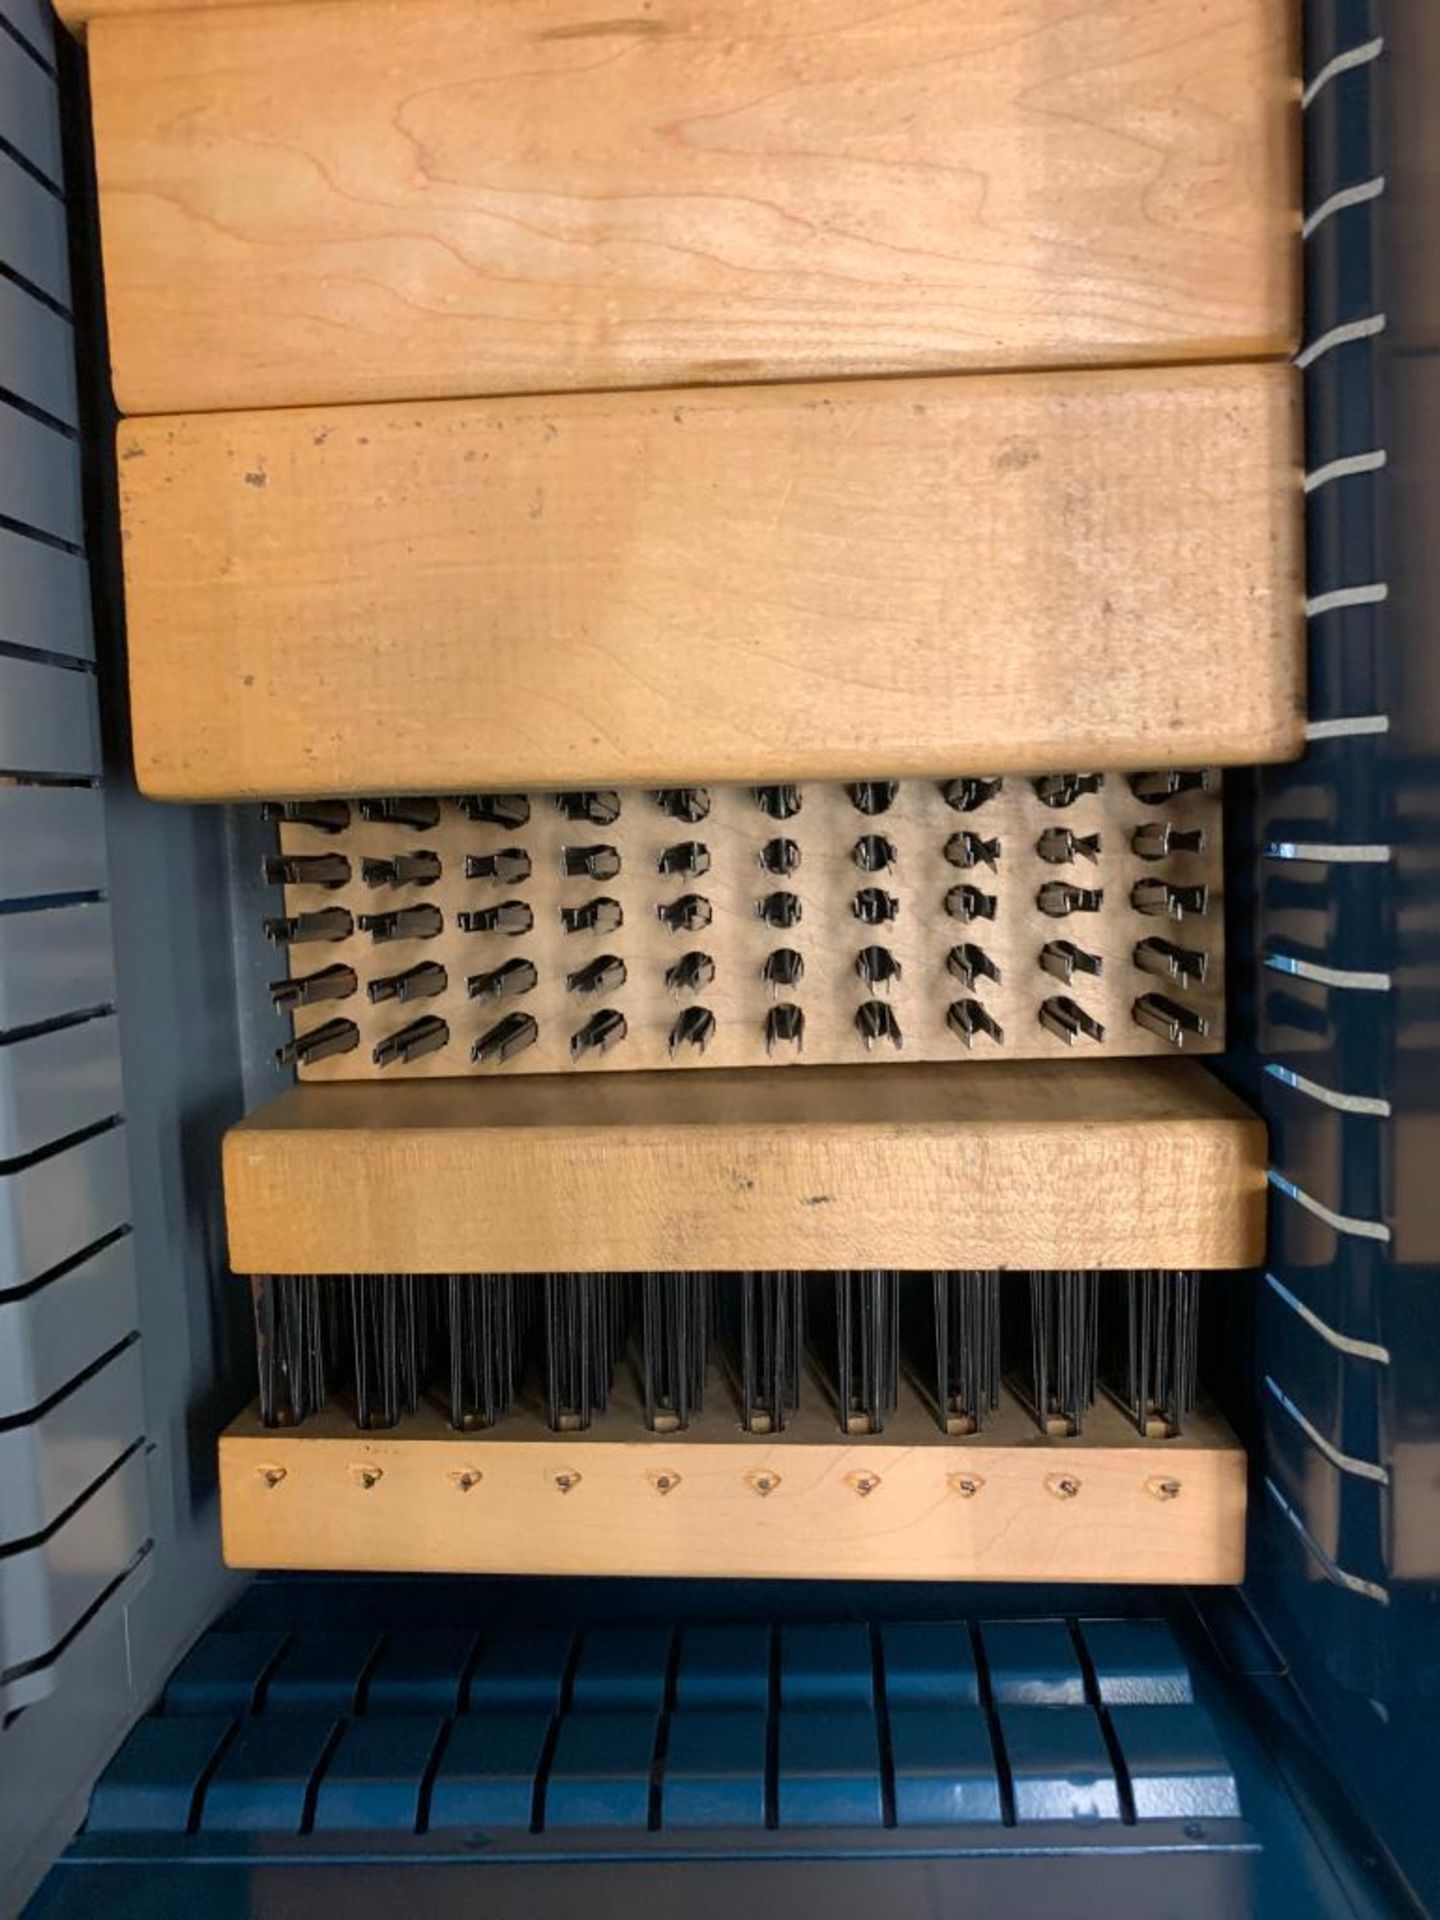 Vidmar 6-Drawer Cabinet w/ Assorted Brushes, Hydraulic Couplings, Oil Cans, Blades, Chipping Hammer - Image 8 of 8